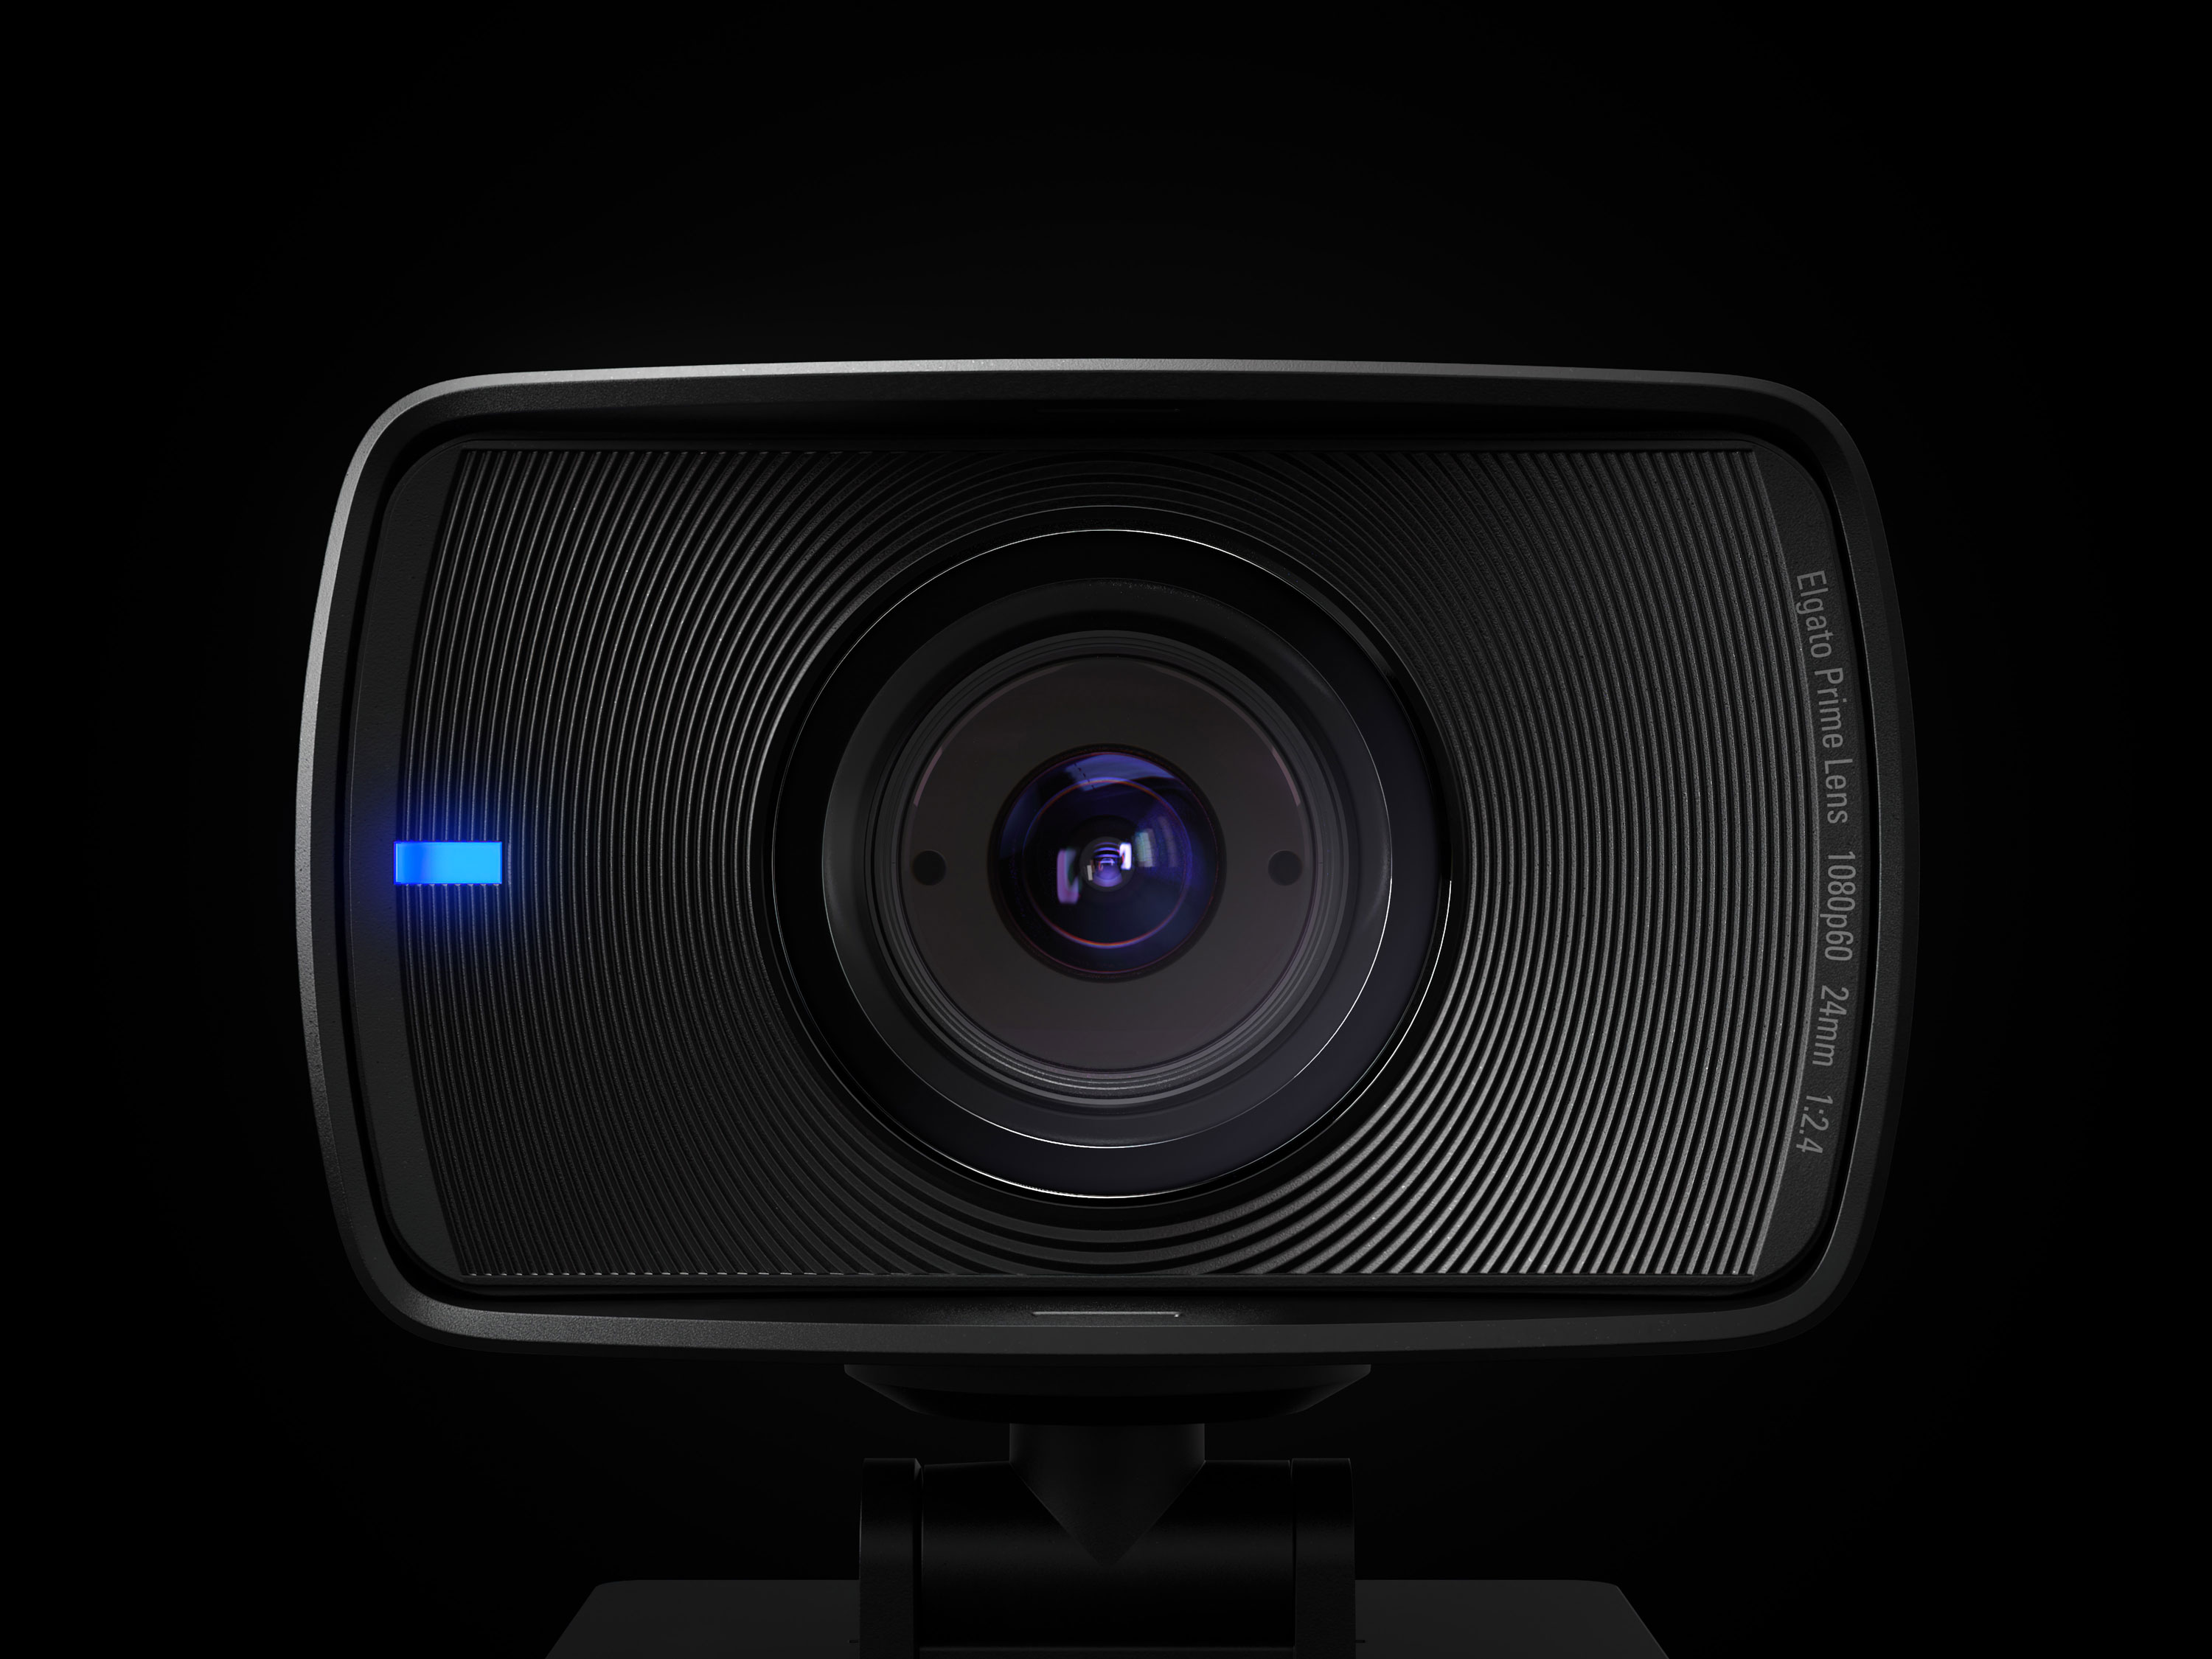 The front of the Elgato Facecam.